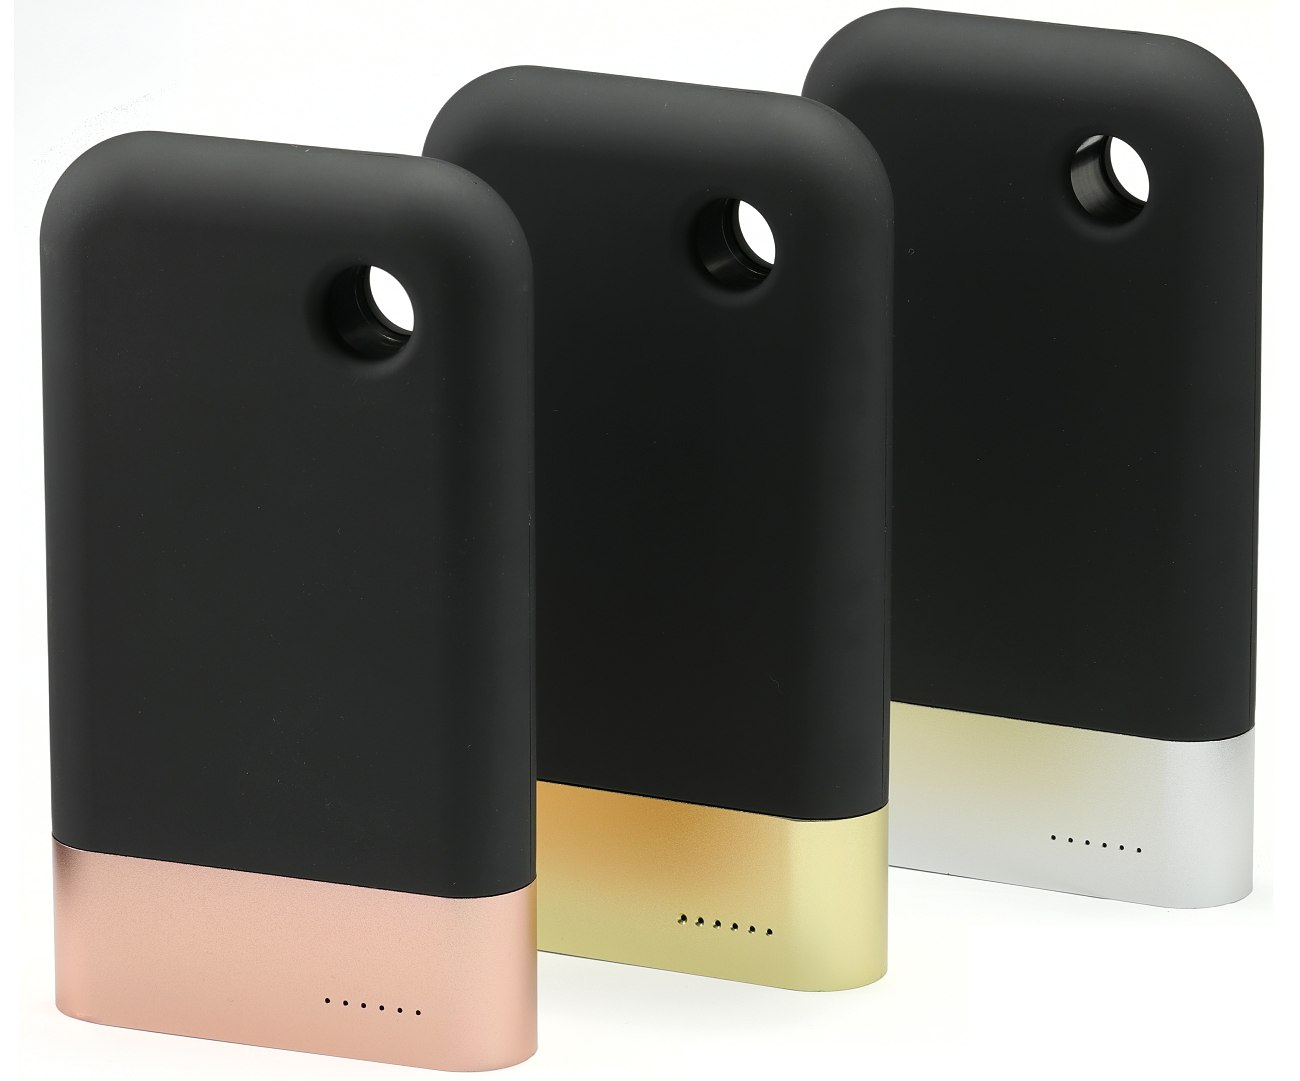 Three standing large black power banks with metal bands silver, gold and copper colour